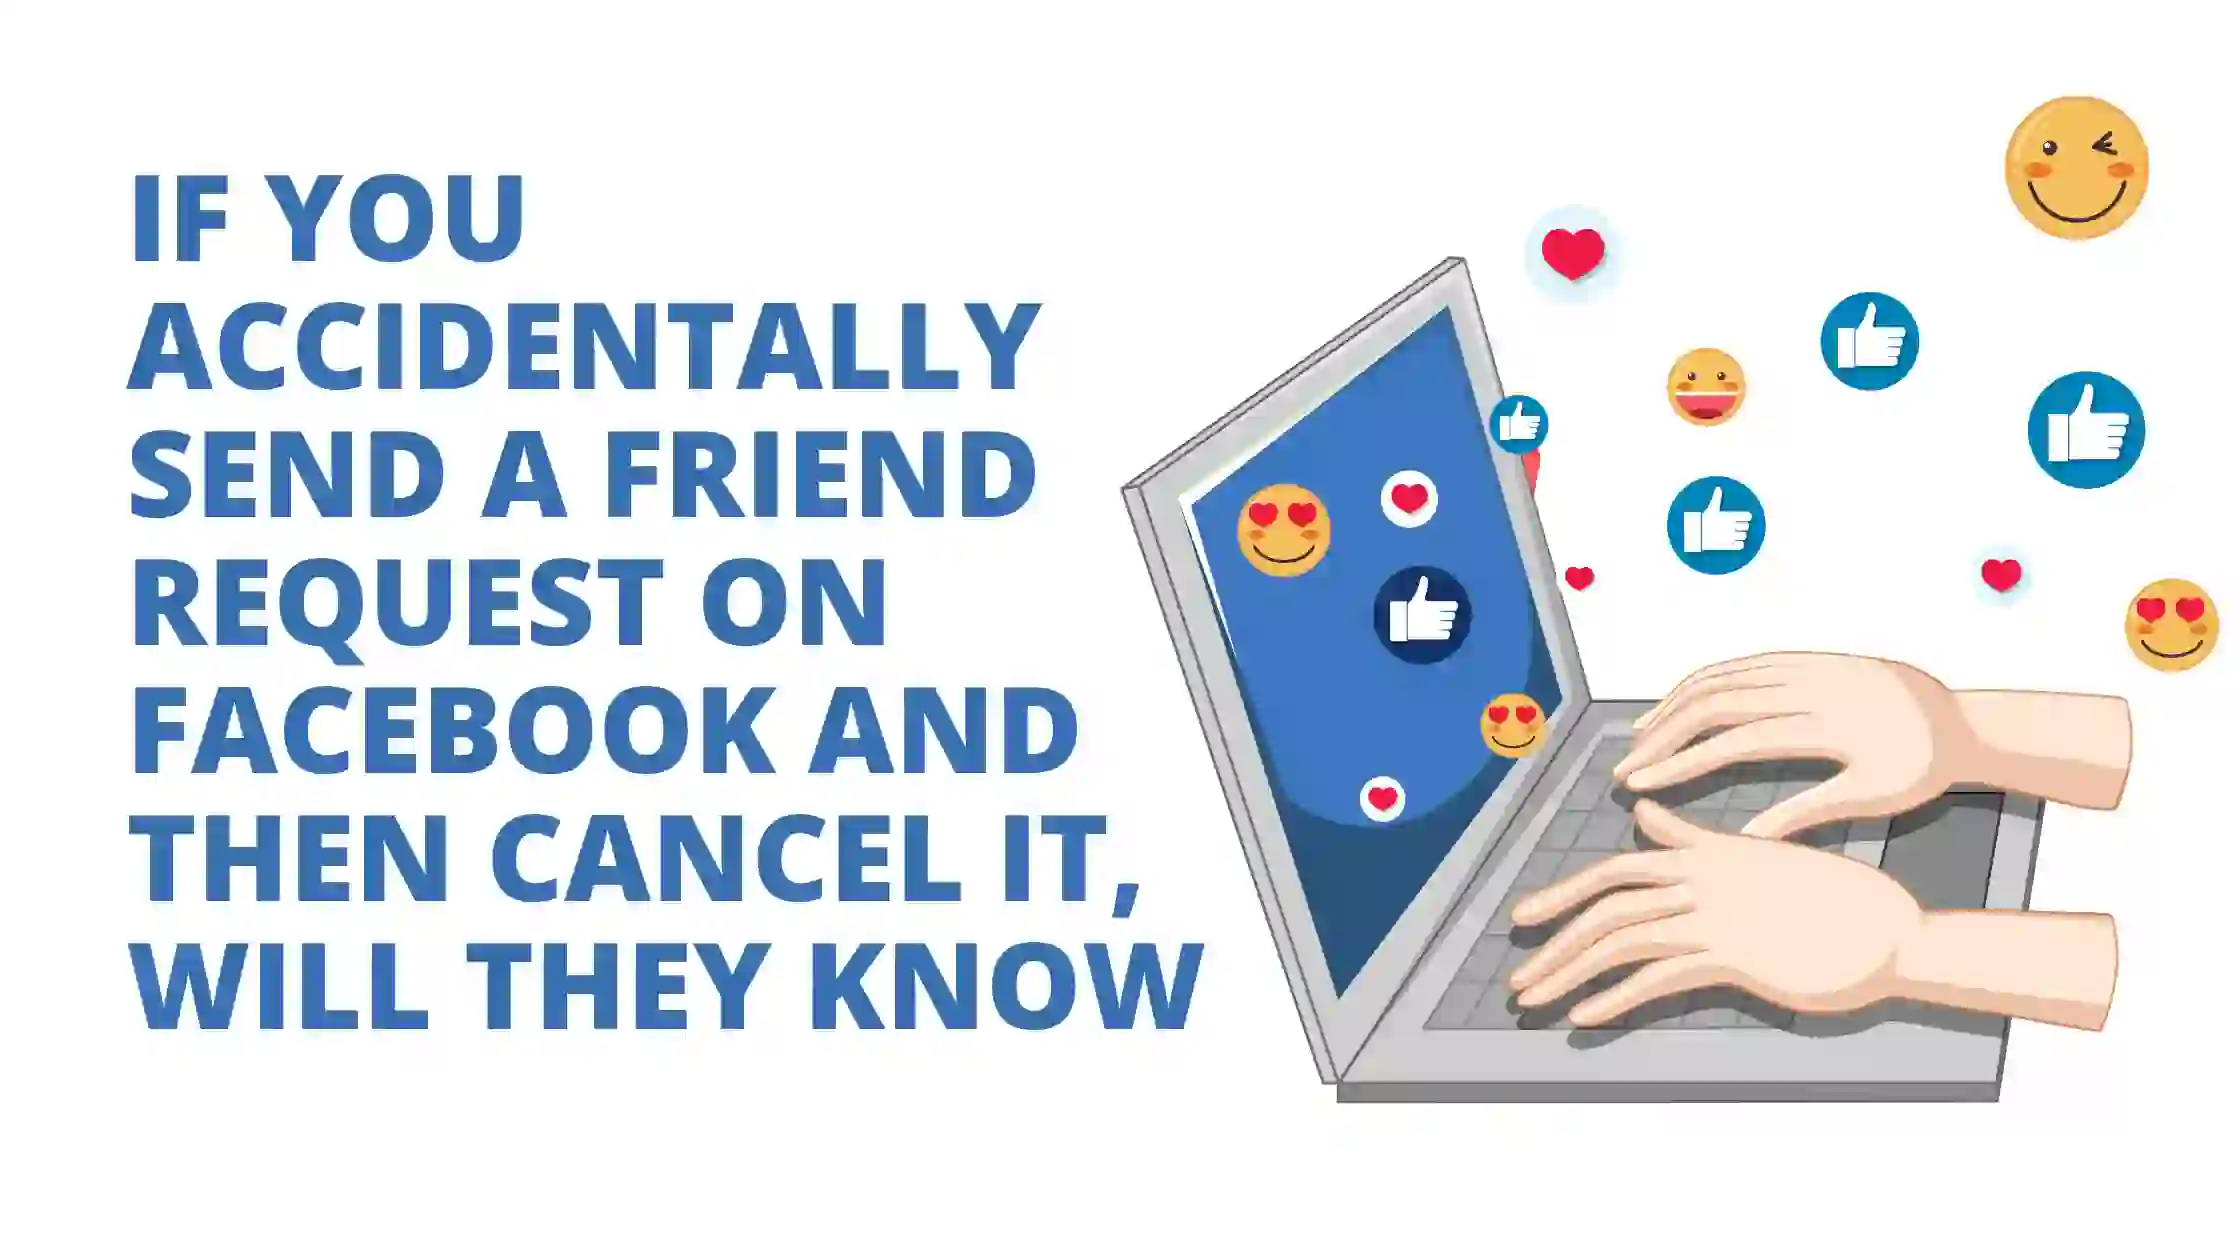 If You Accidentally Send a Friend Request on Facebook and Then Cancel It, Will They Know